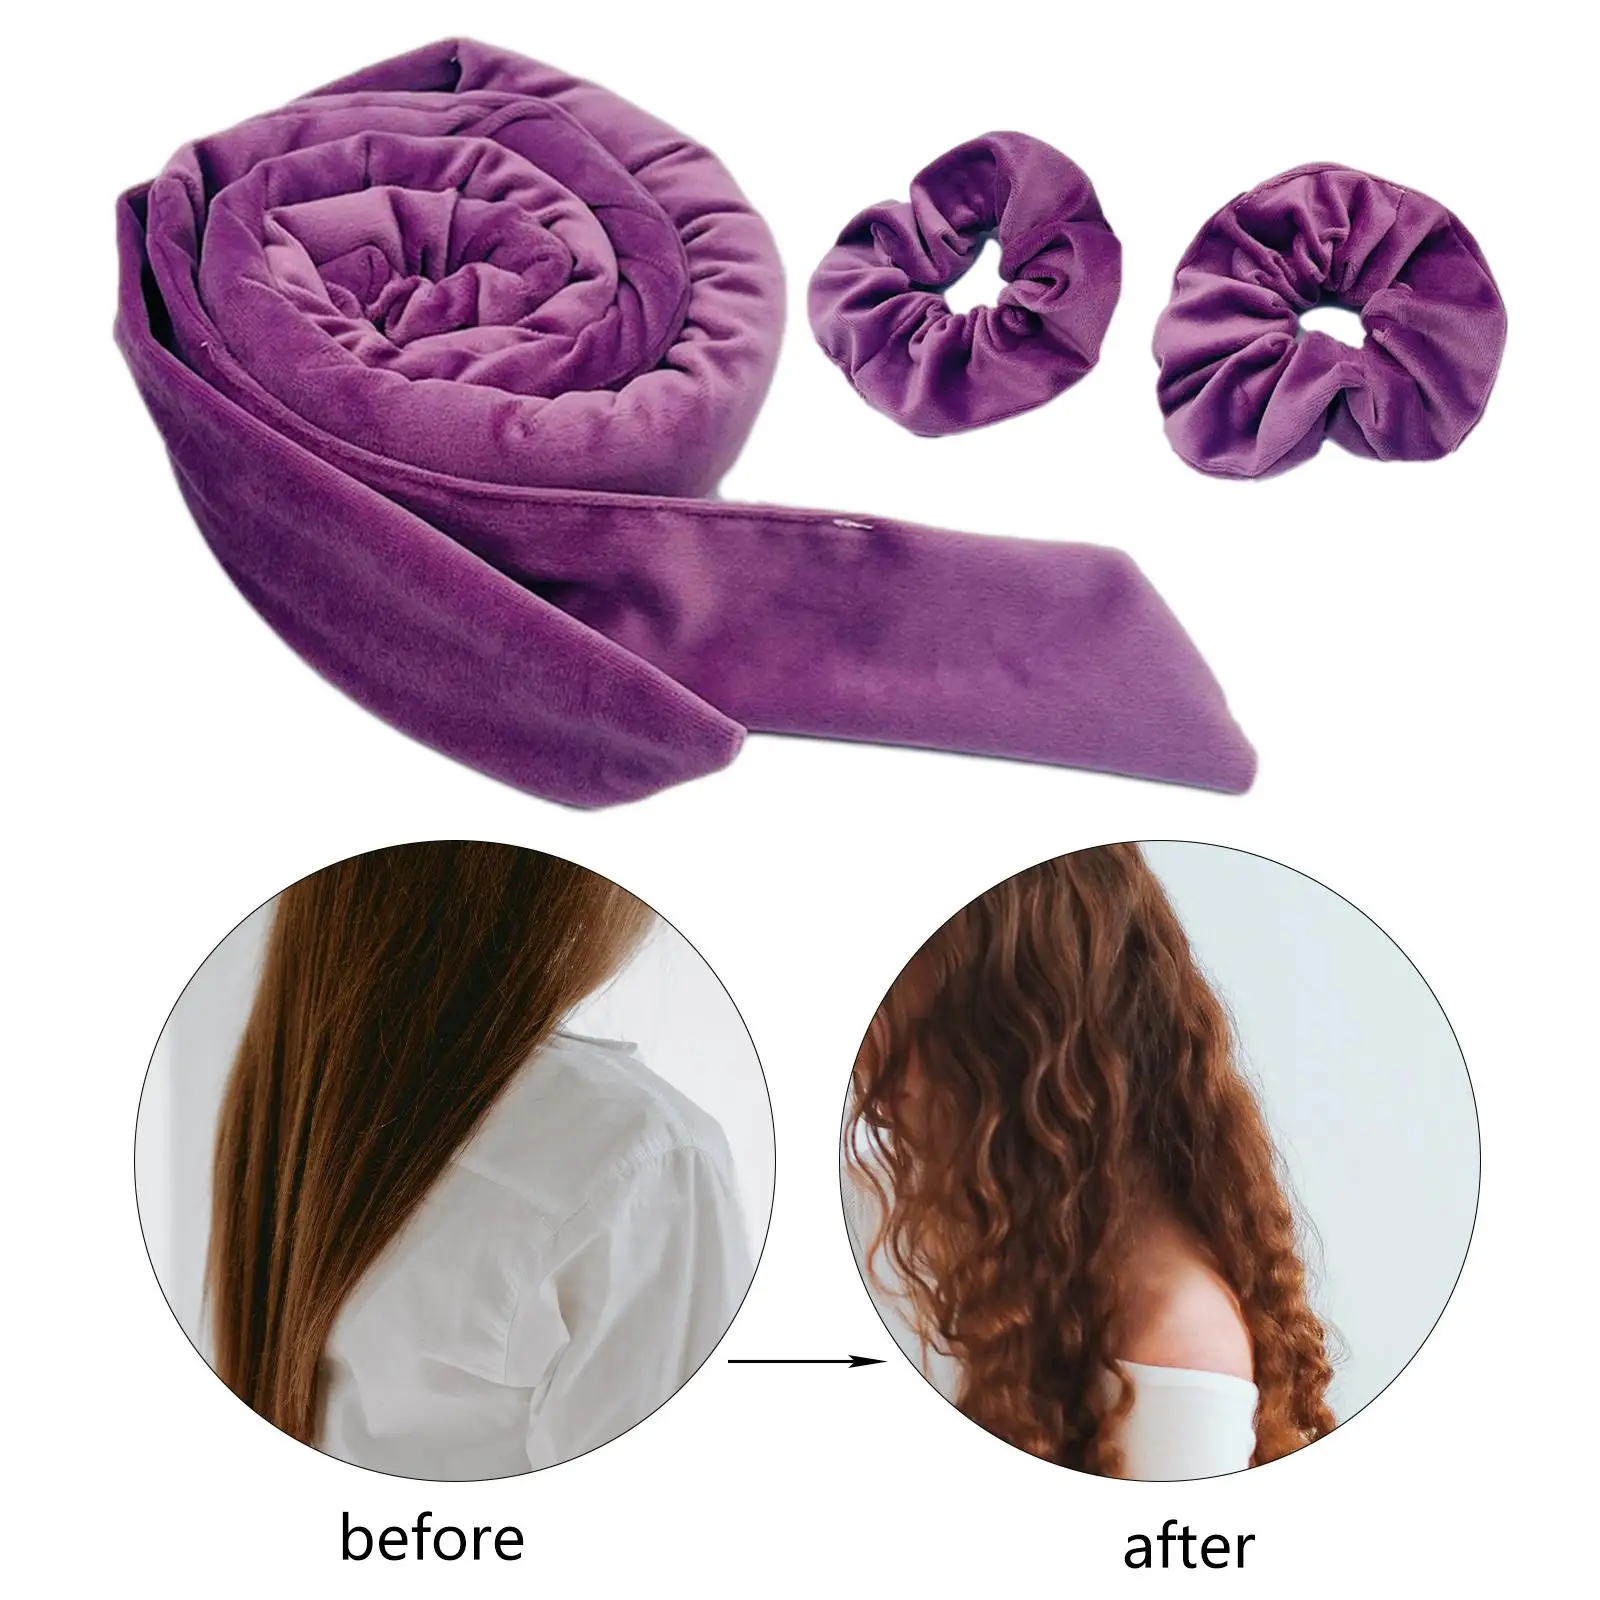 Sleeping Heatless Curling Rod Hairdressing Tool Comfortable with 2Pcs Scrunchies Soft hair roller Headband for Long Short Hair